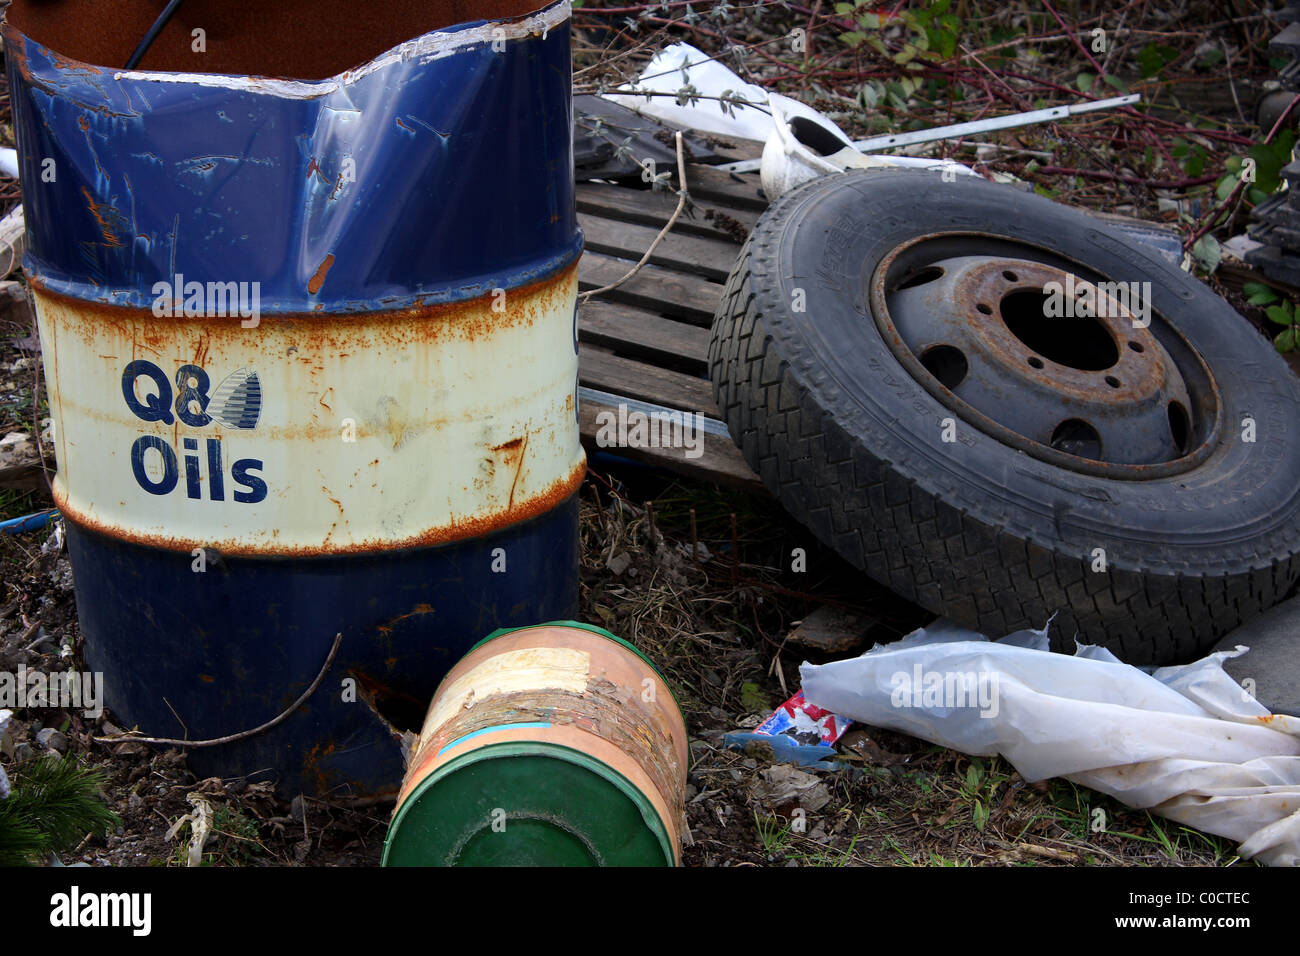 A Q8 oils steel drum, old tyre and other rubbish dumped on Council land. Stock Photo